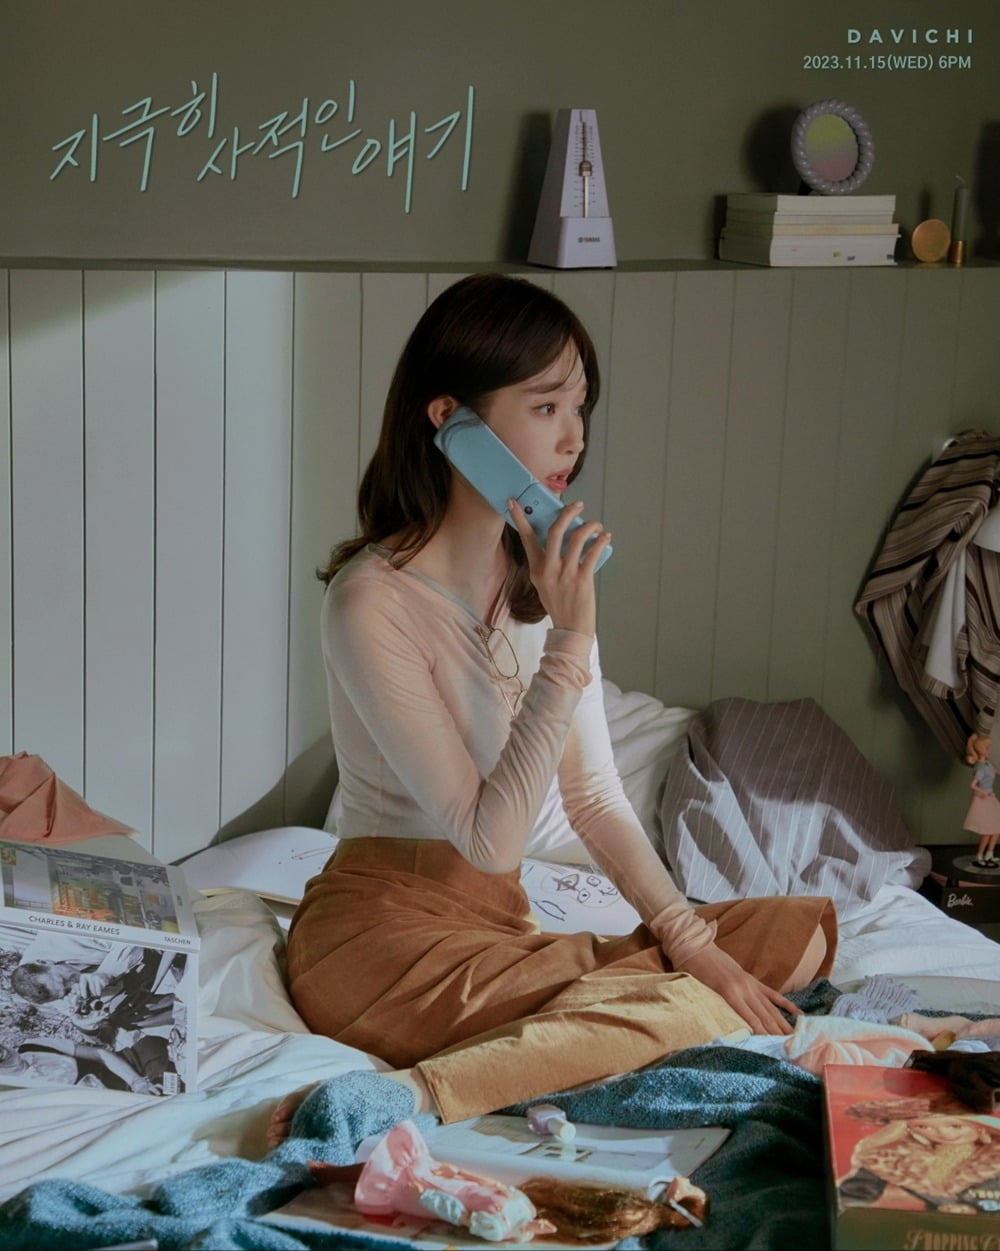 Davichi released personal concept photo for new song 'Extremely Personal Story'